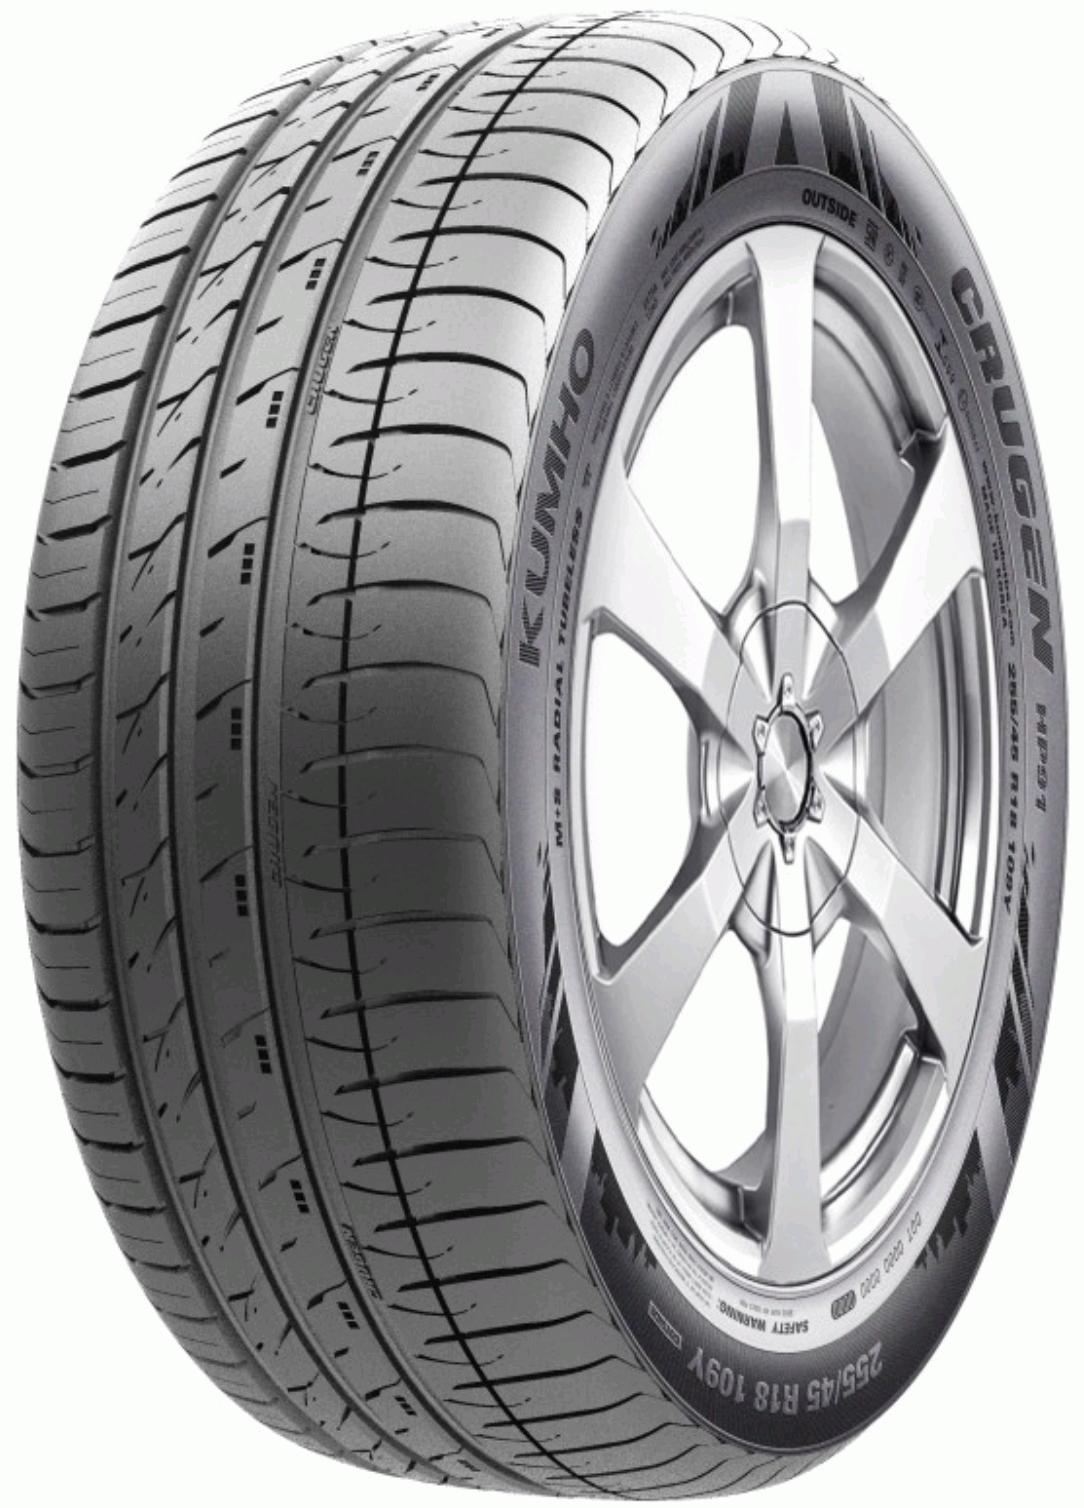 Kumho Crugen HP91 - Tire Reviews and Tests